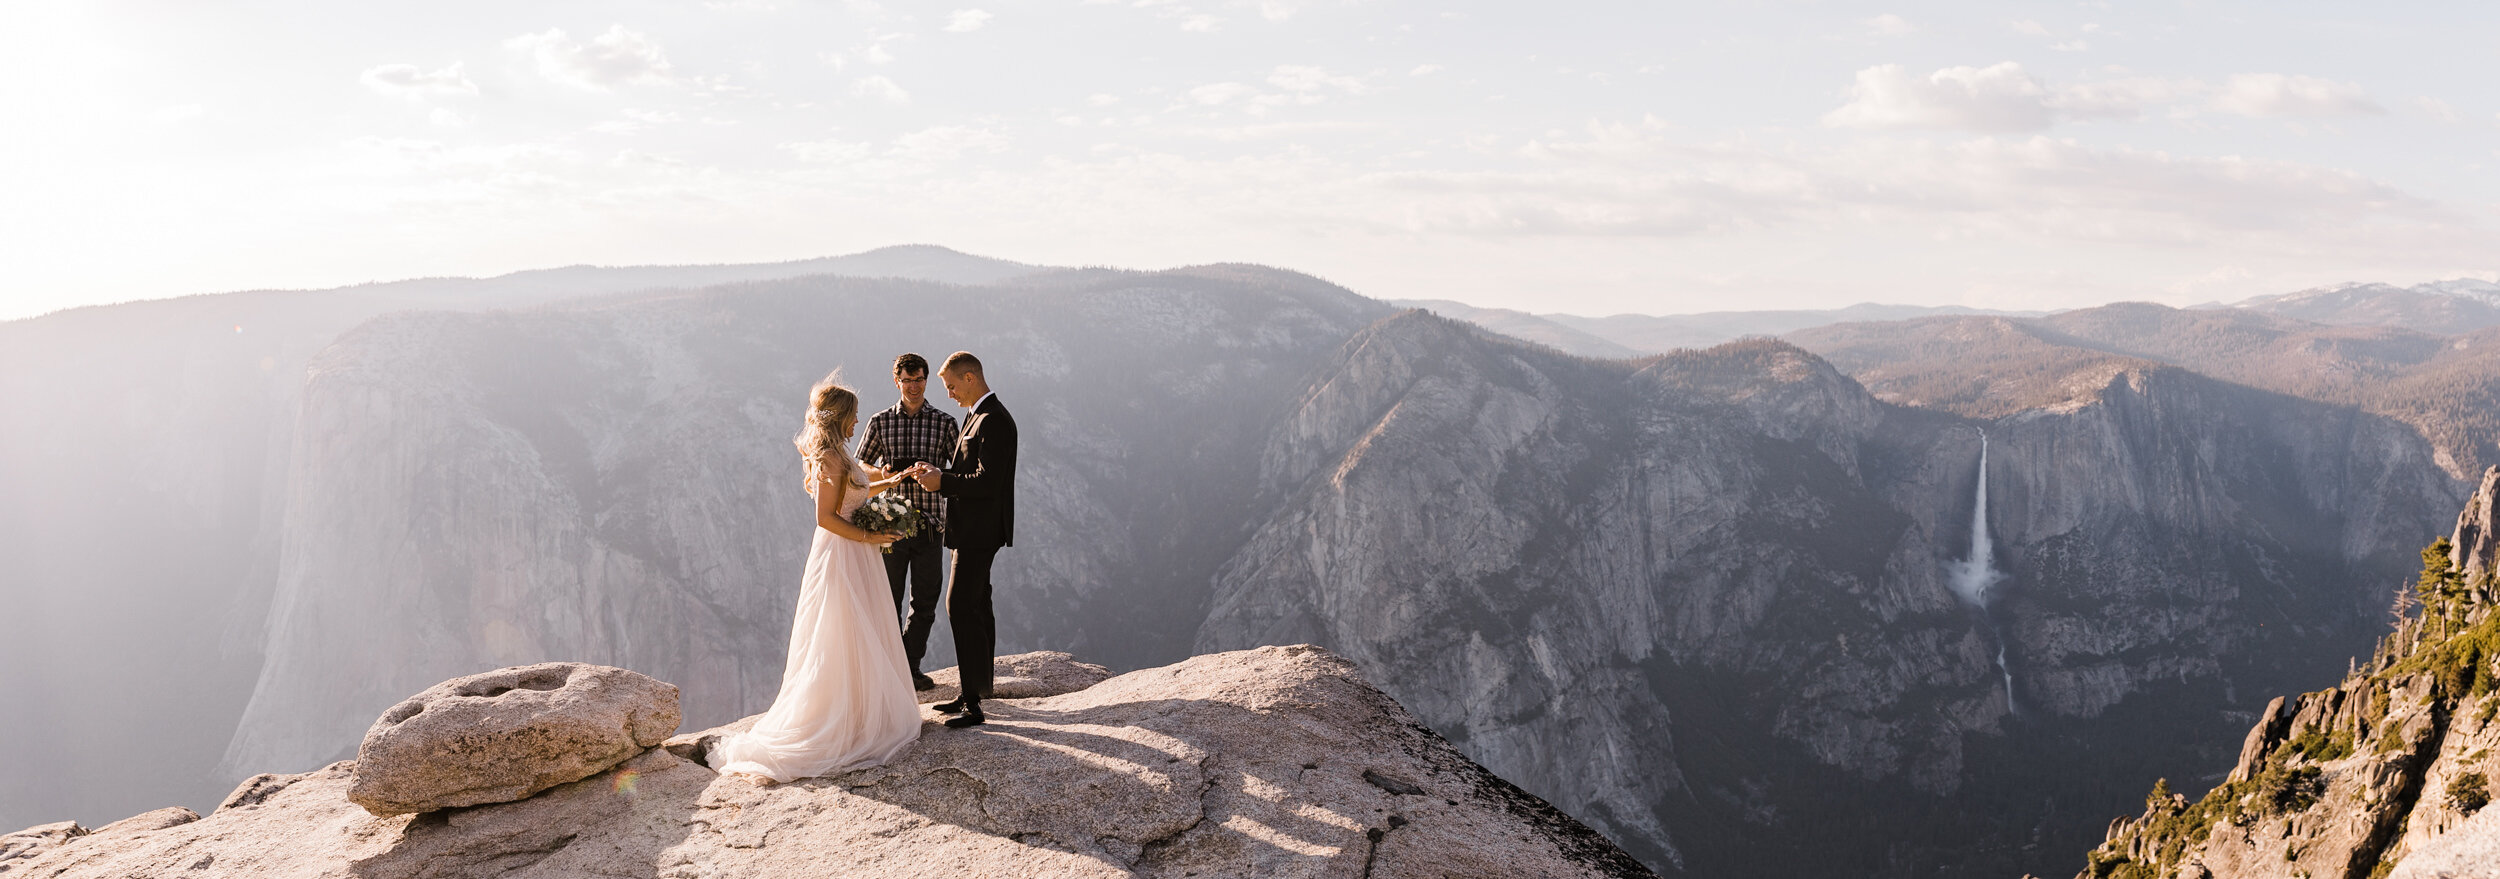 yosemite national park wedding ceremony on the edge of a cliff | the hearnes adventure photography